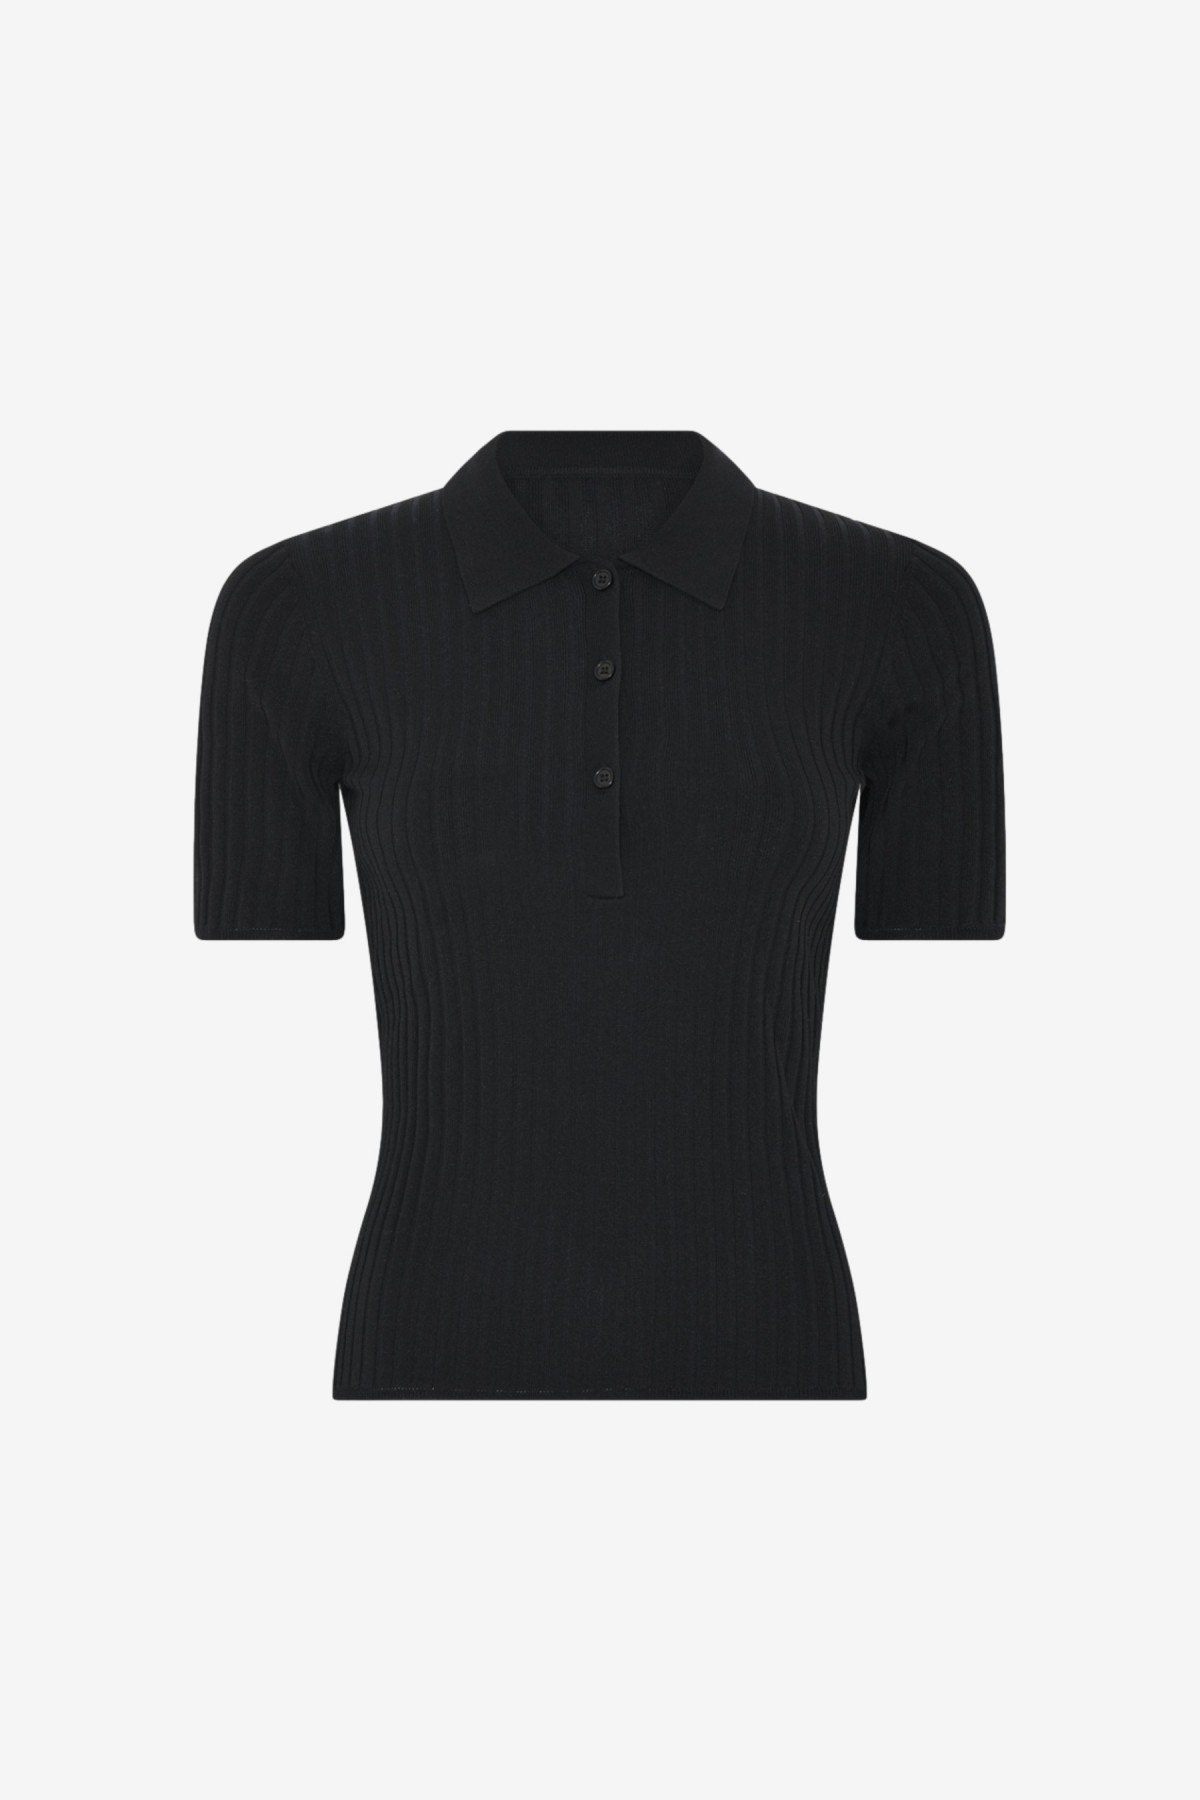 Herskind Dallas Knit Polo Blouse in Black